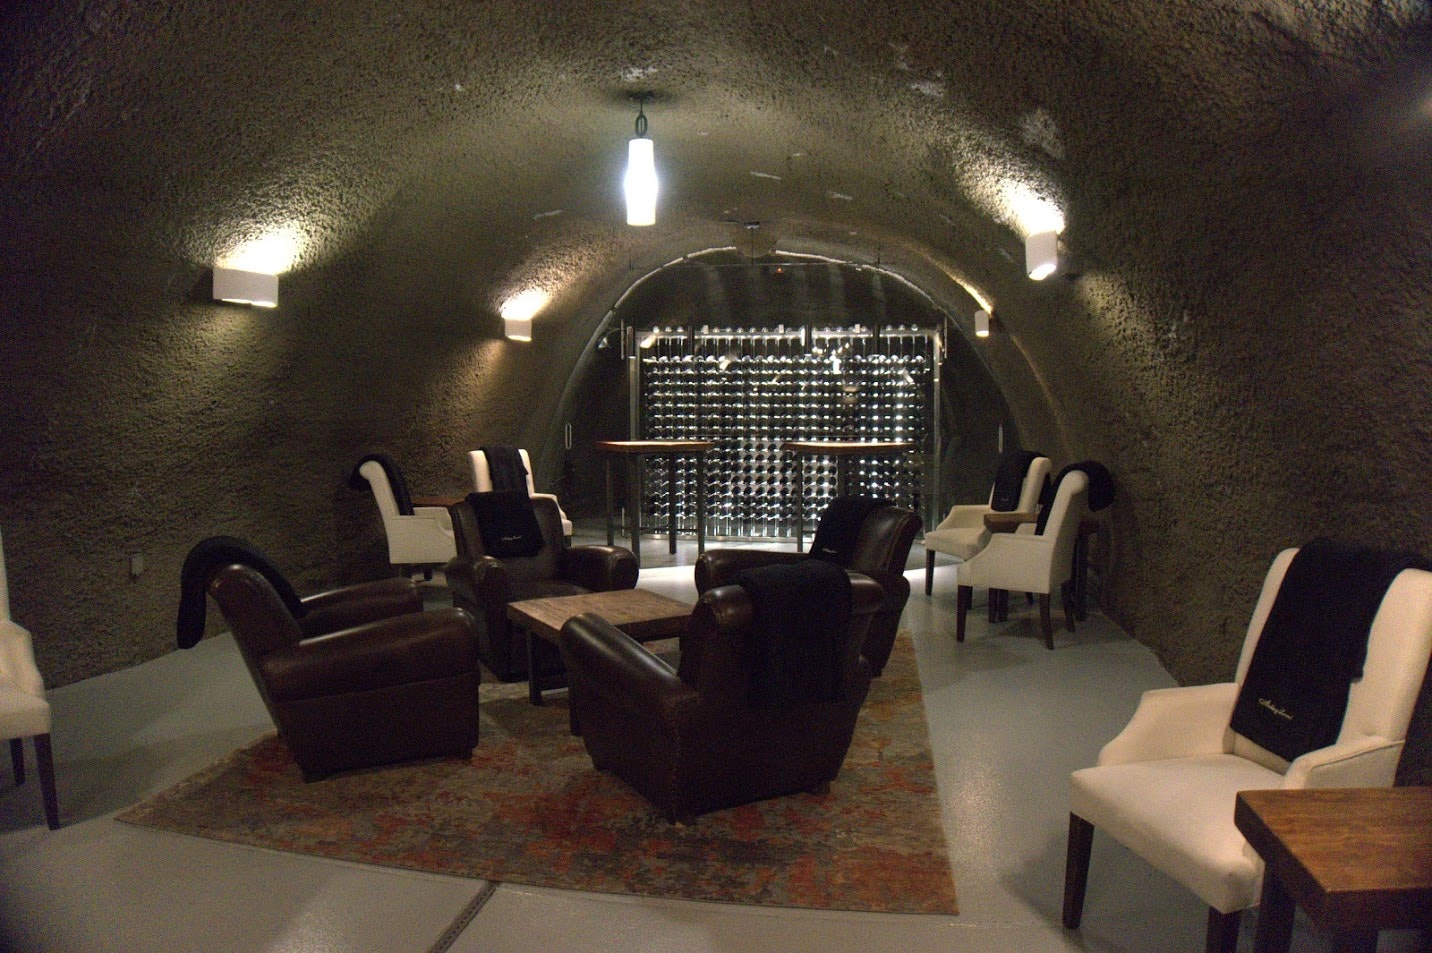 The dark, masculine interior of Archery Summit Tasting Room is a curved, arch-shaped space with dark walls and white lights highlighting a red and brown rug, dark leather arm chairs, and white contemporary chairs